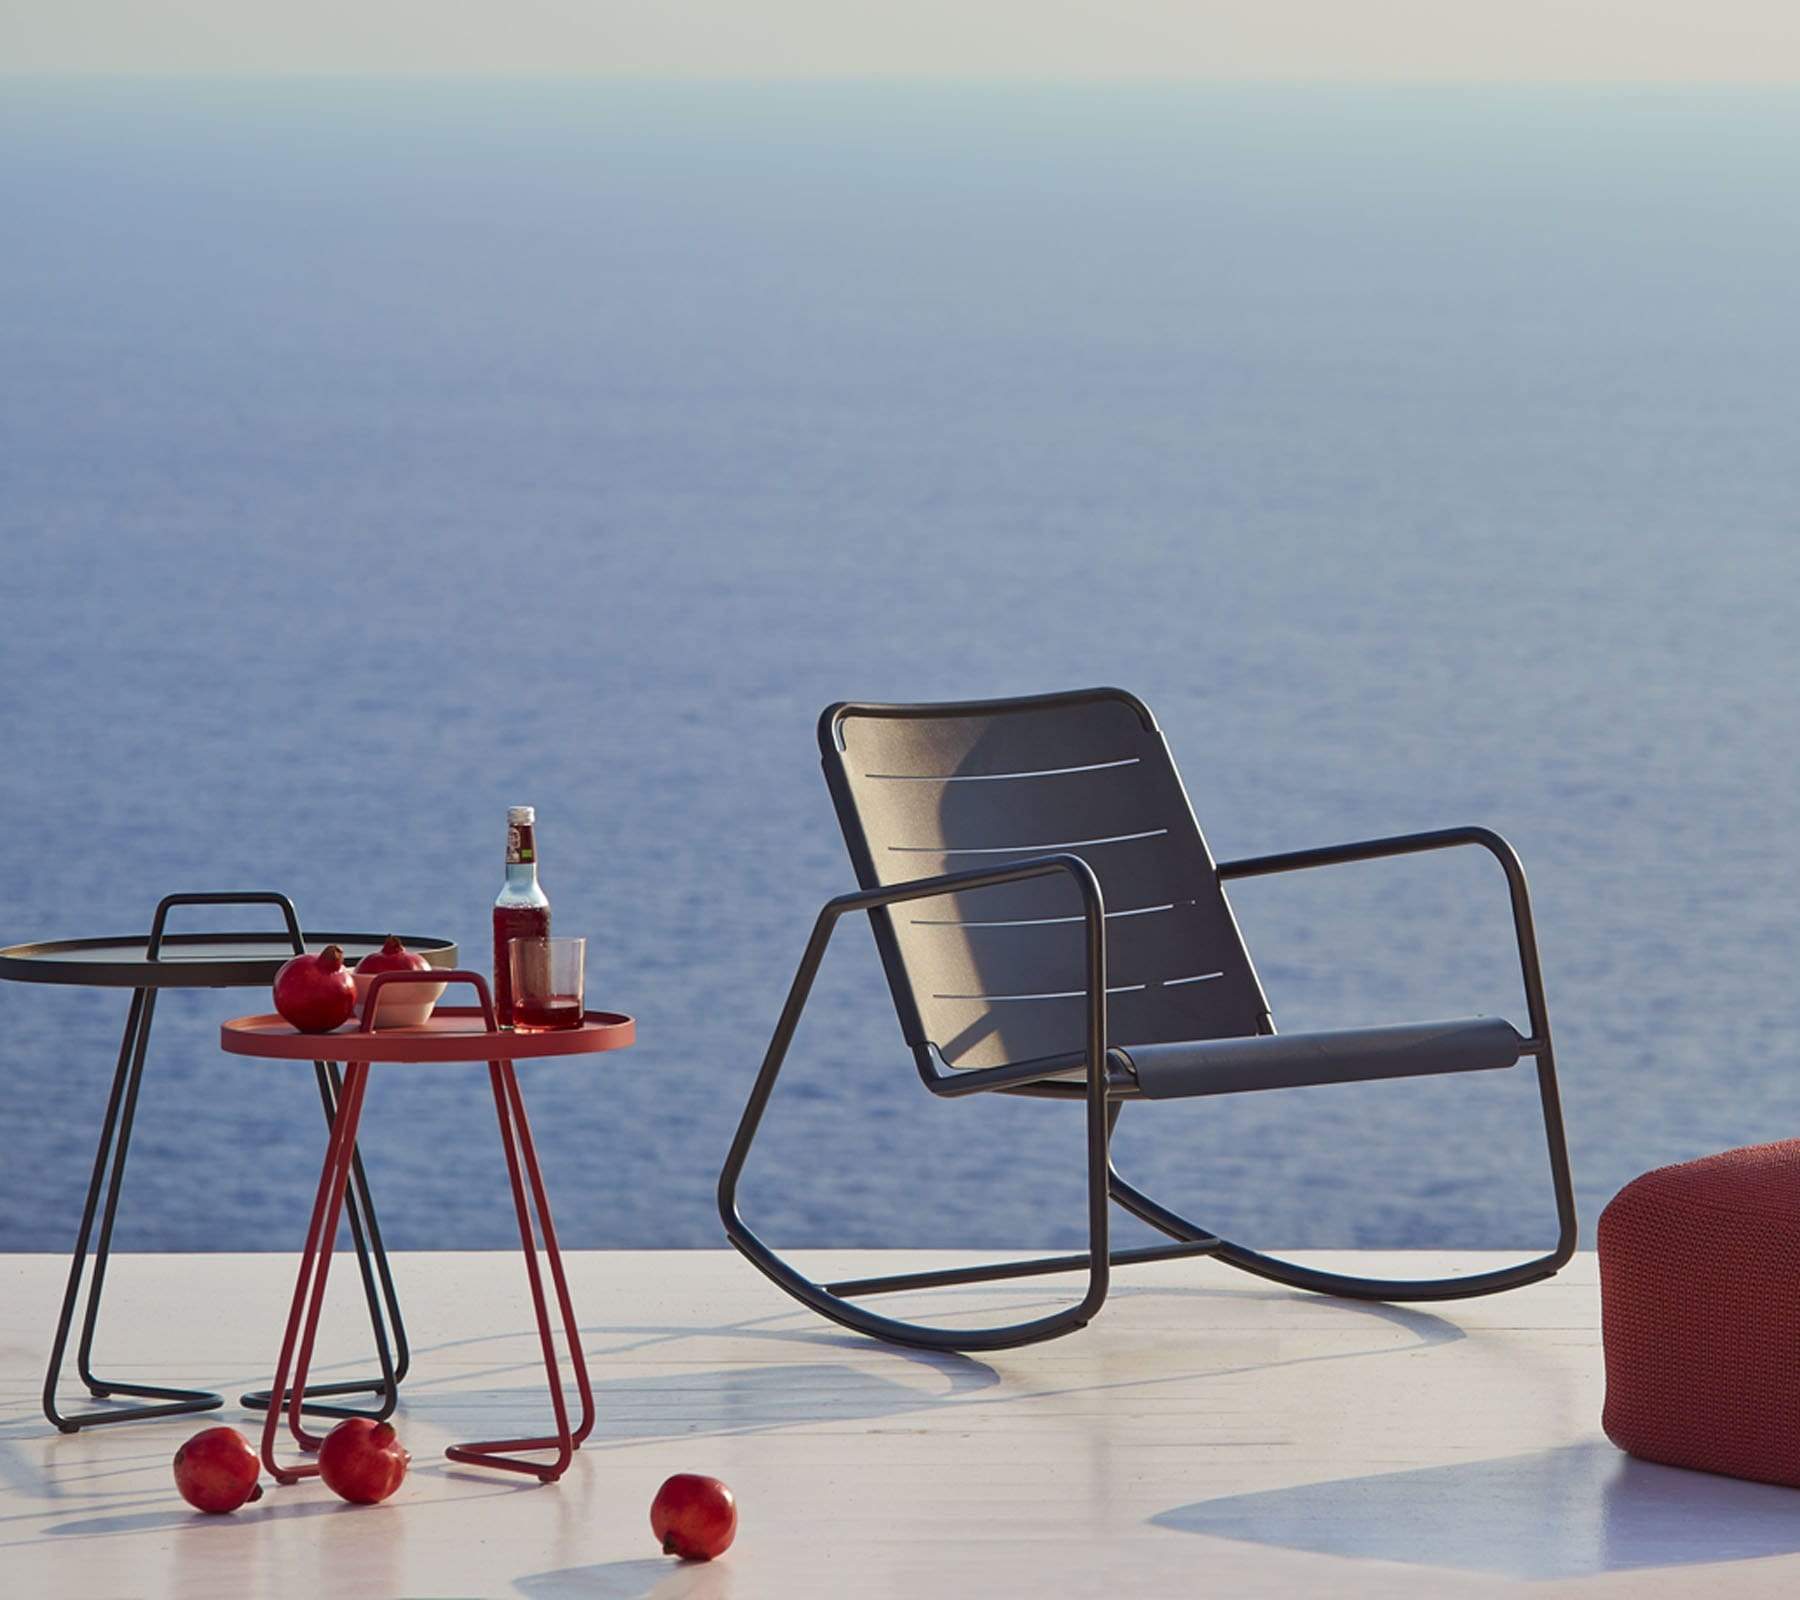 Boxhill's Copenhagen Rocking Chair lifestyle image with side tables and red footstool at sea front